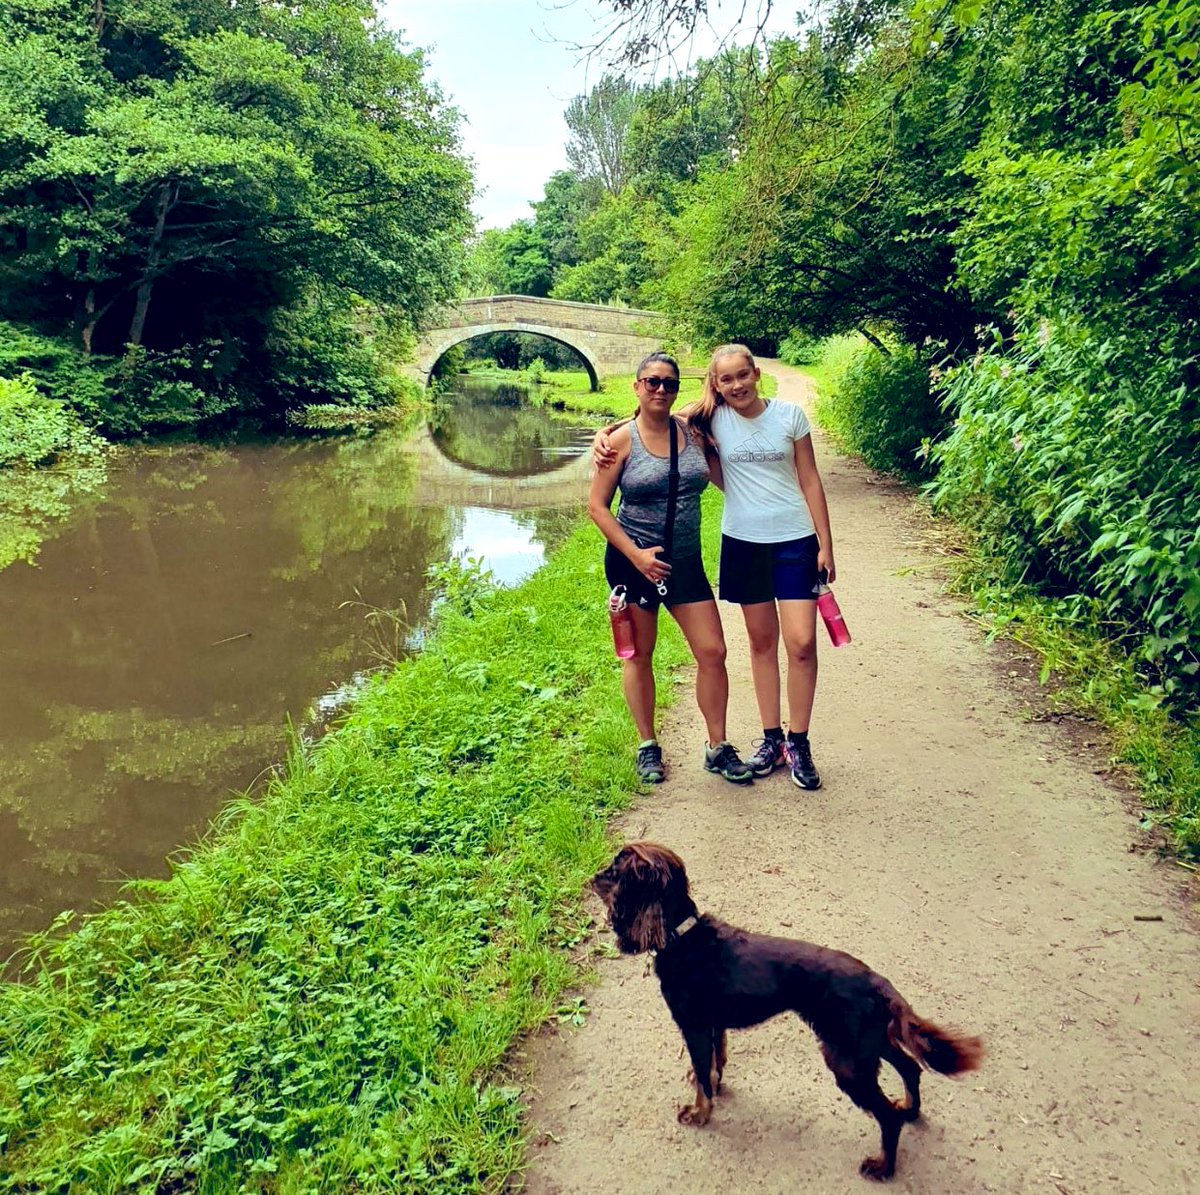 Nice little 15k in the bag…… dragged the daughter out too! Never wants to come but always glad she did when we finish 😎 #girlswhowalk #stretchthelegs #summerhols #daughter #love #evie